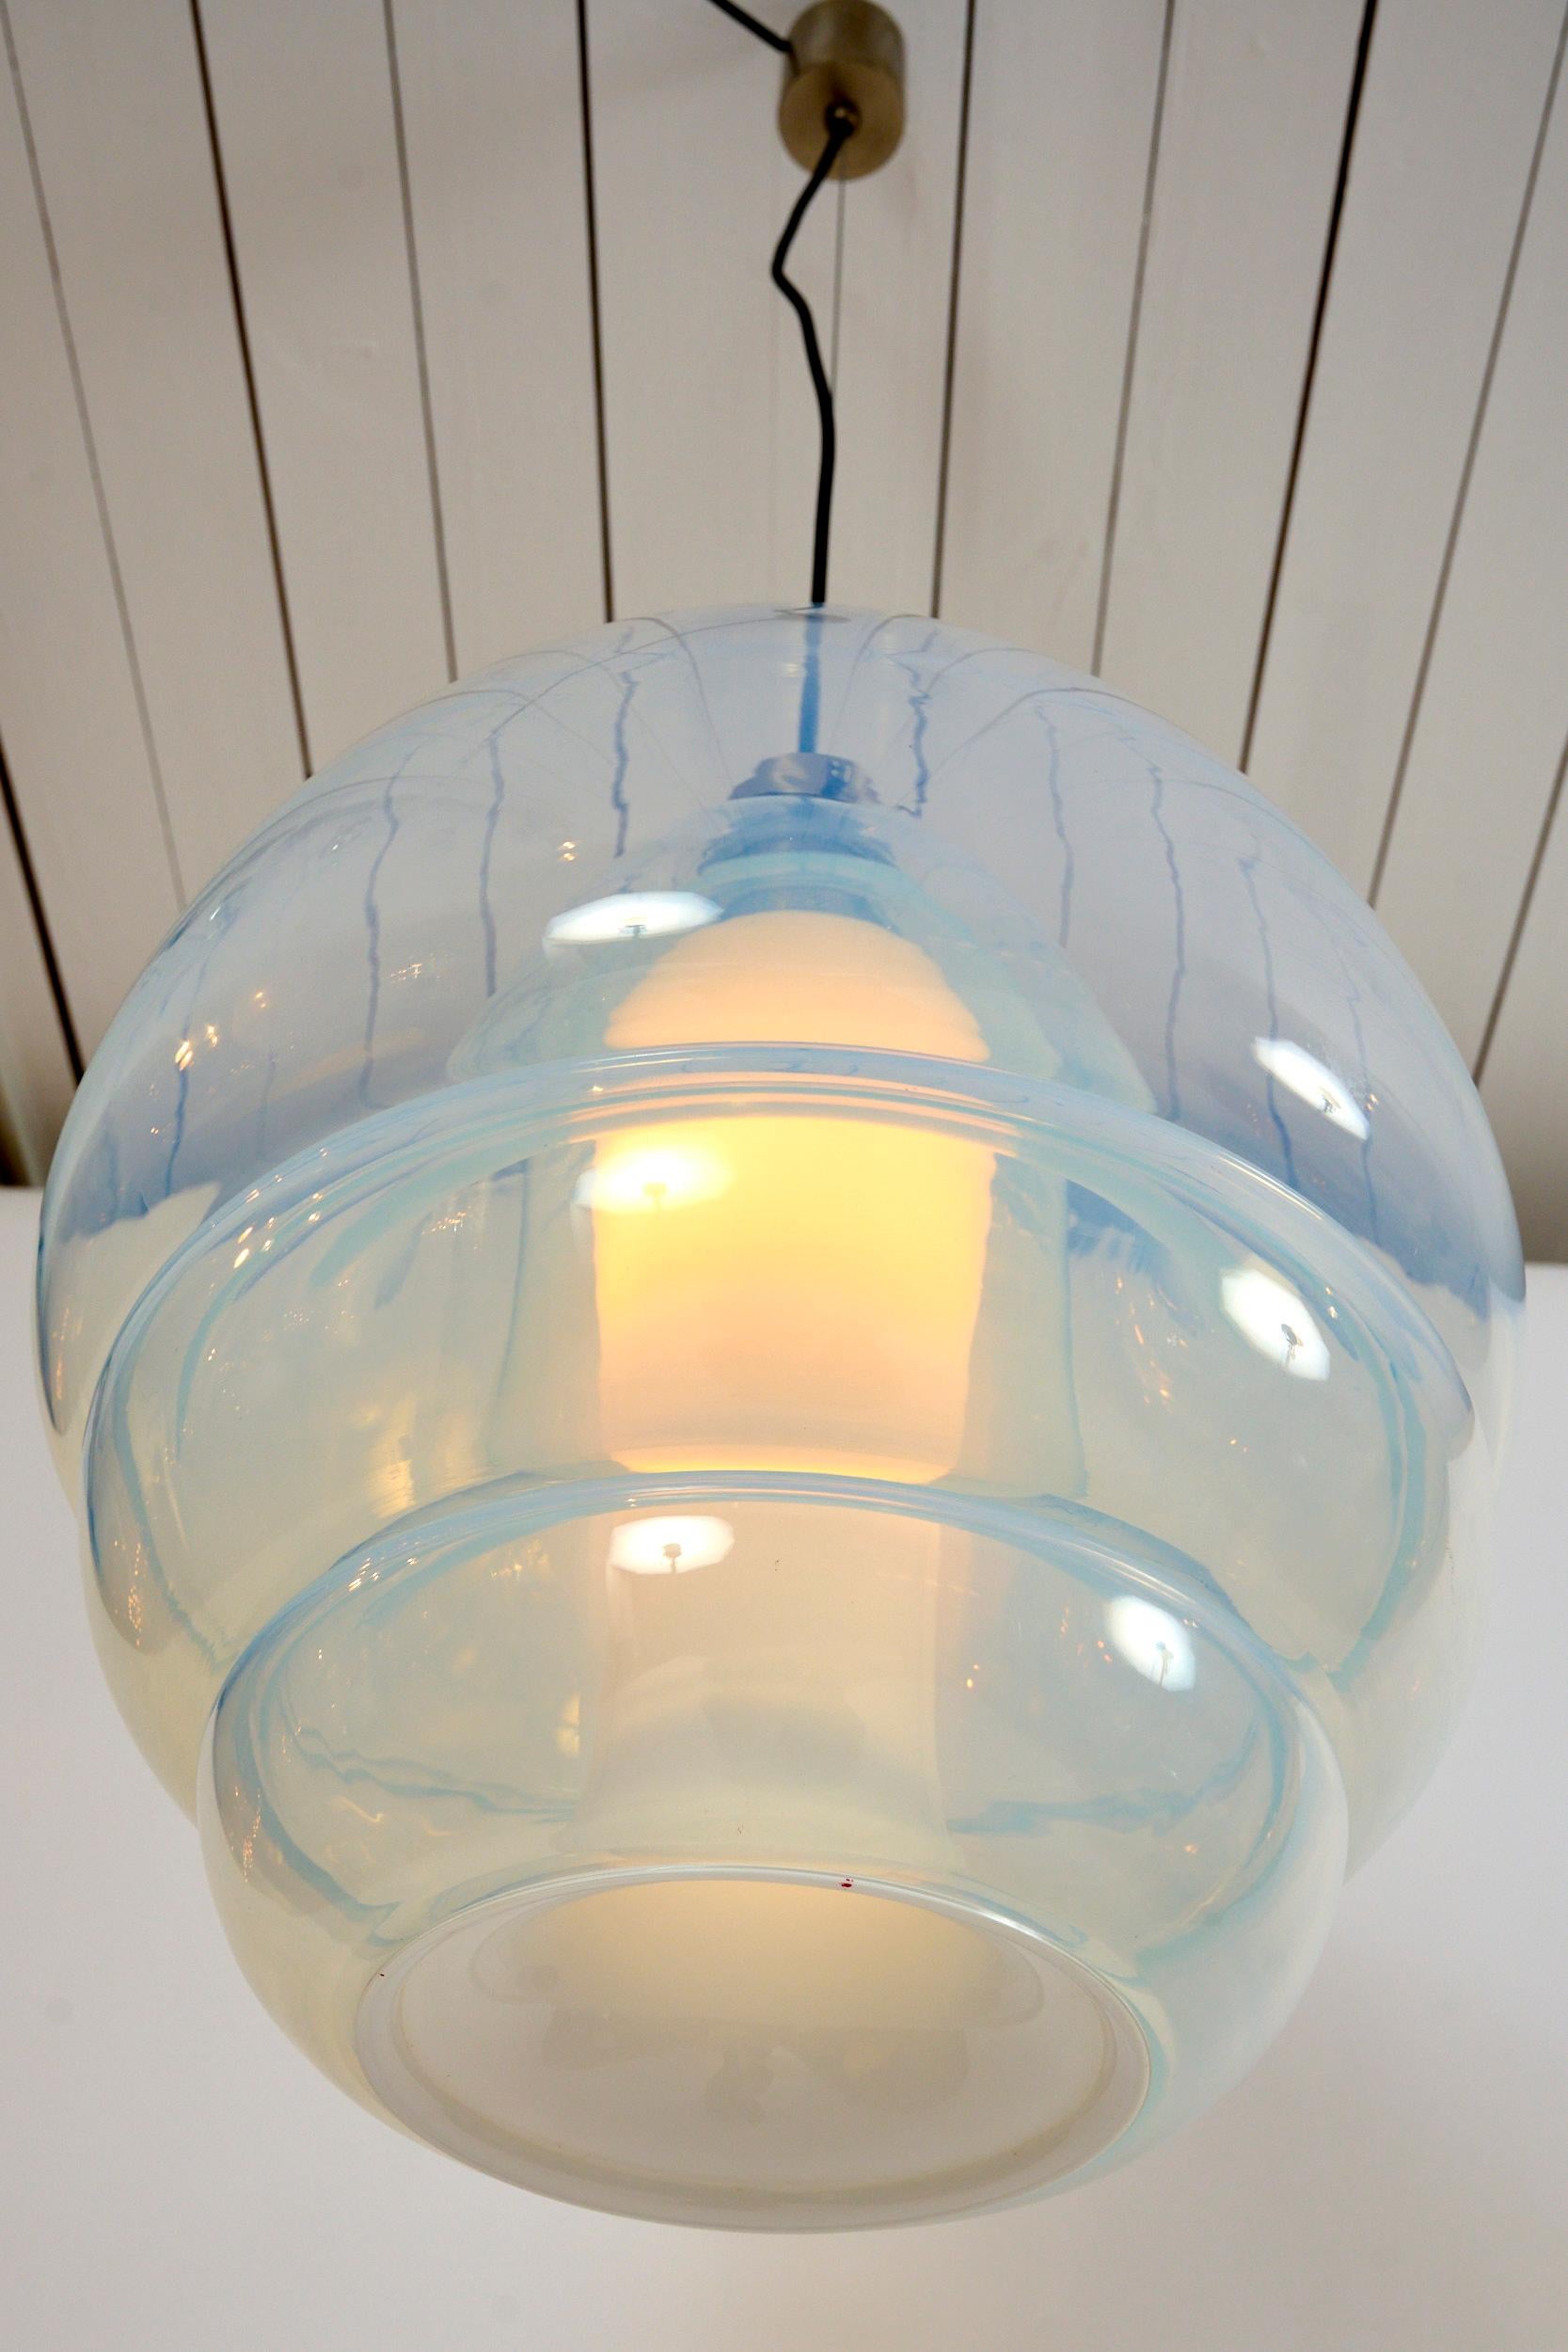 Gorgeous Carlo Nason chandelier in Opalescent and milk glass. c1969.

